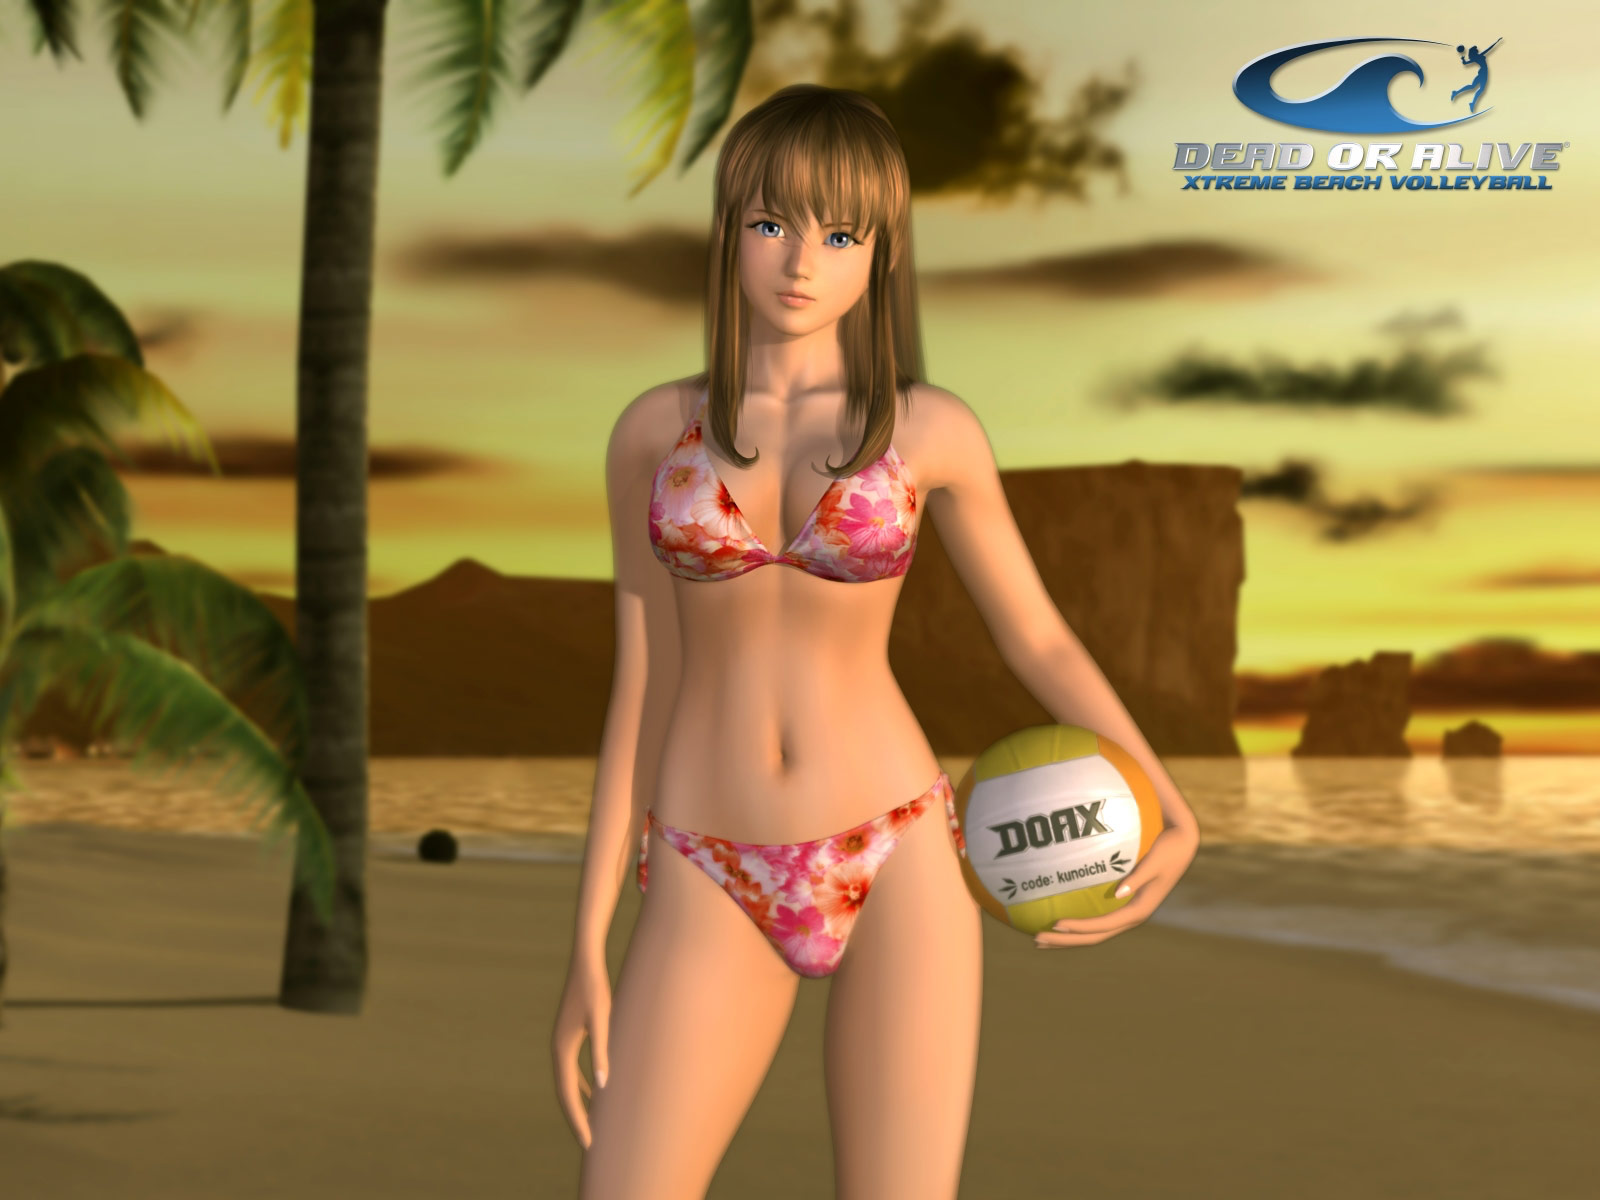 Dead Or Alive Extreme Beach Volley Ball